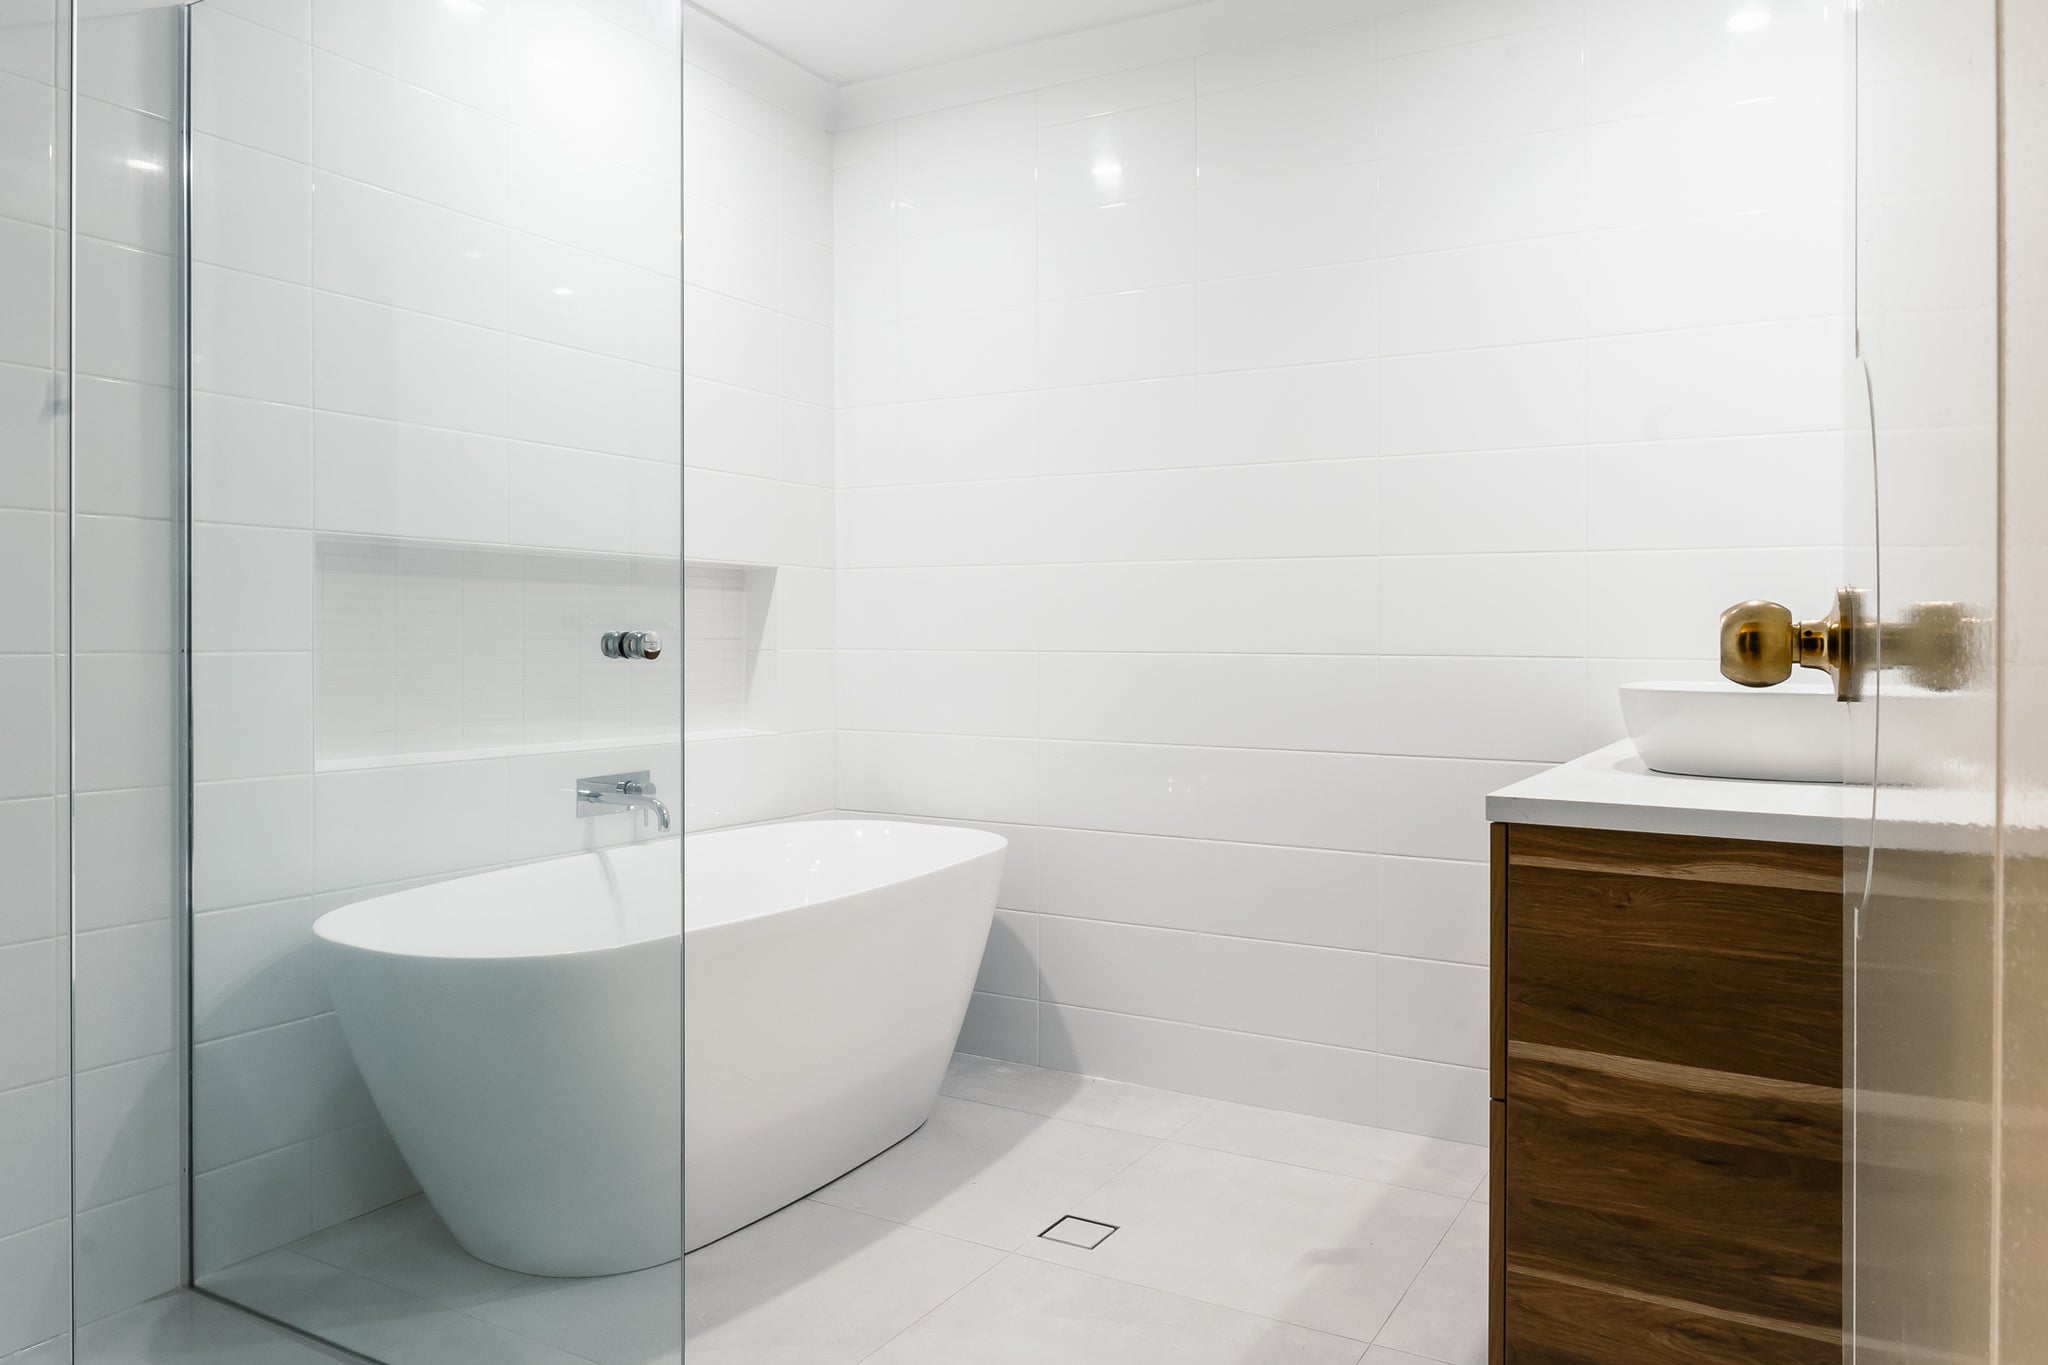 Top 5 Reasons to Renovate Your Bathroom